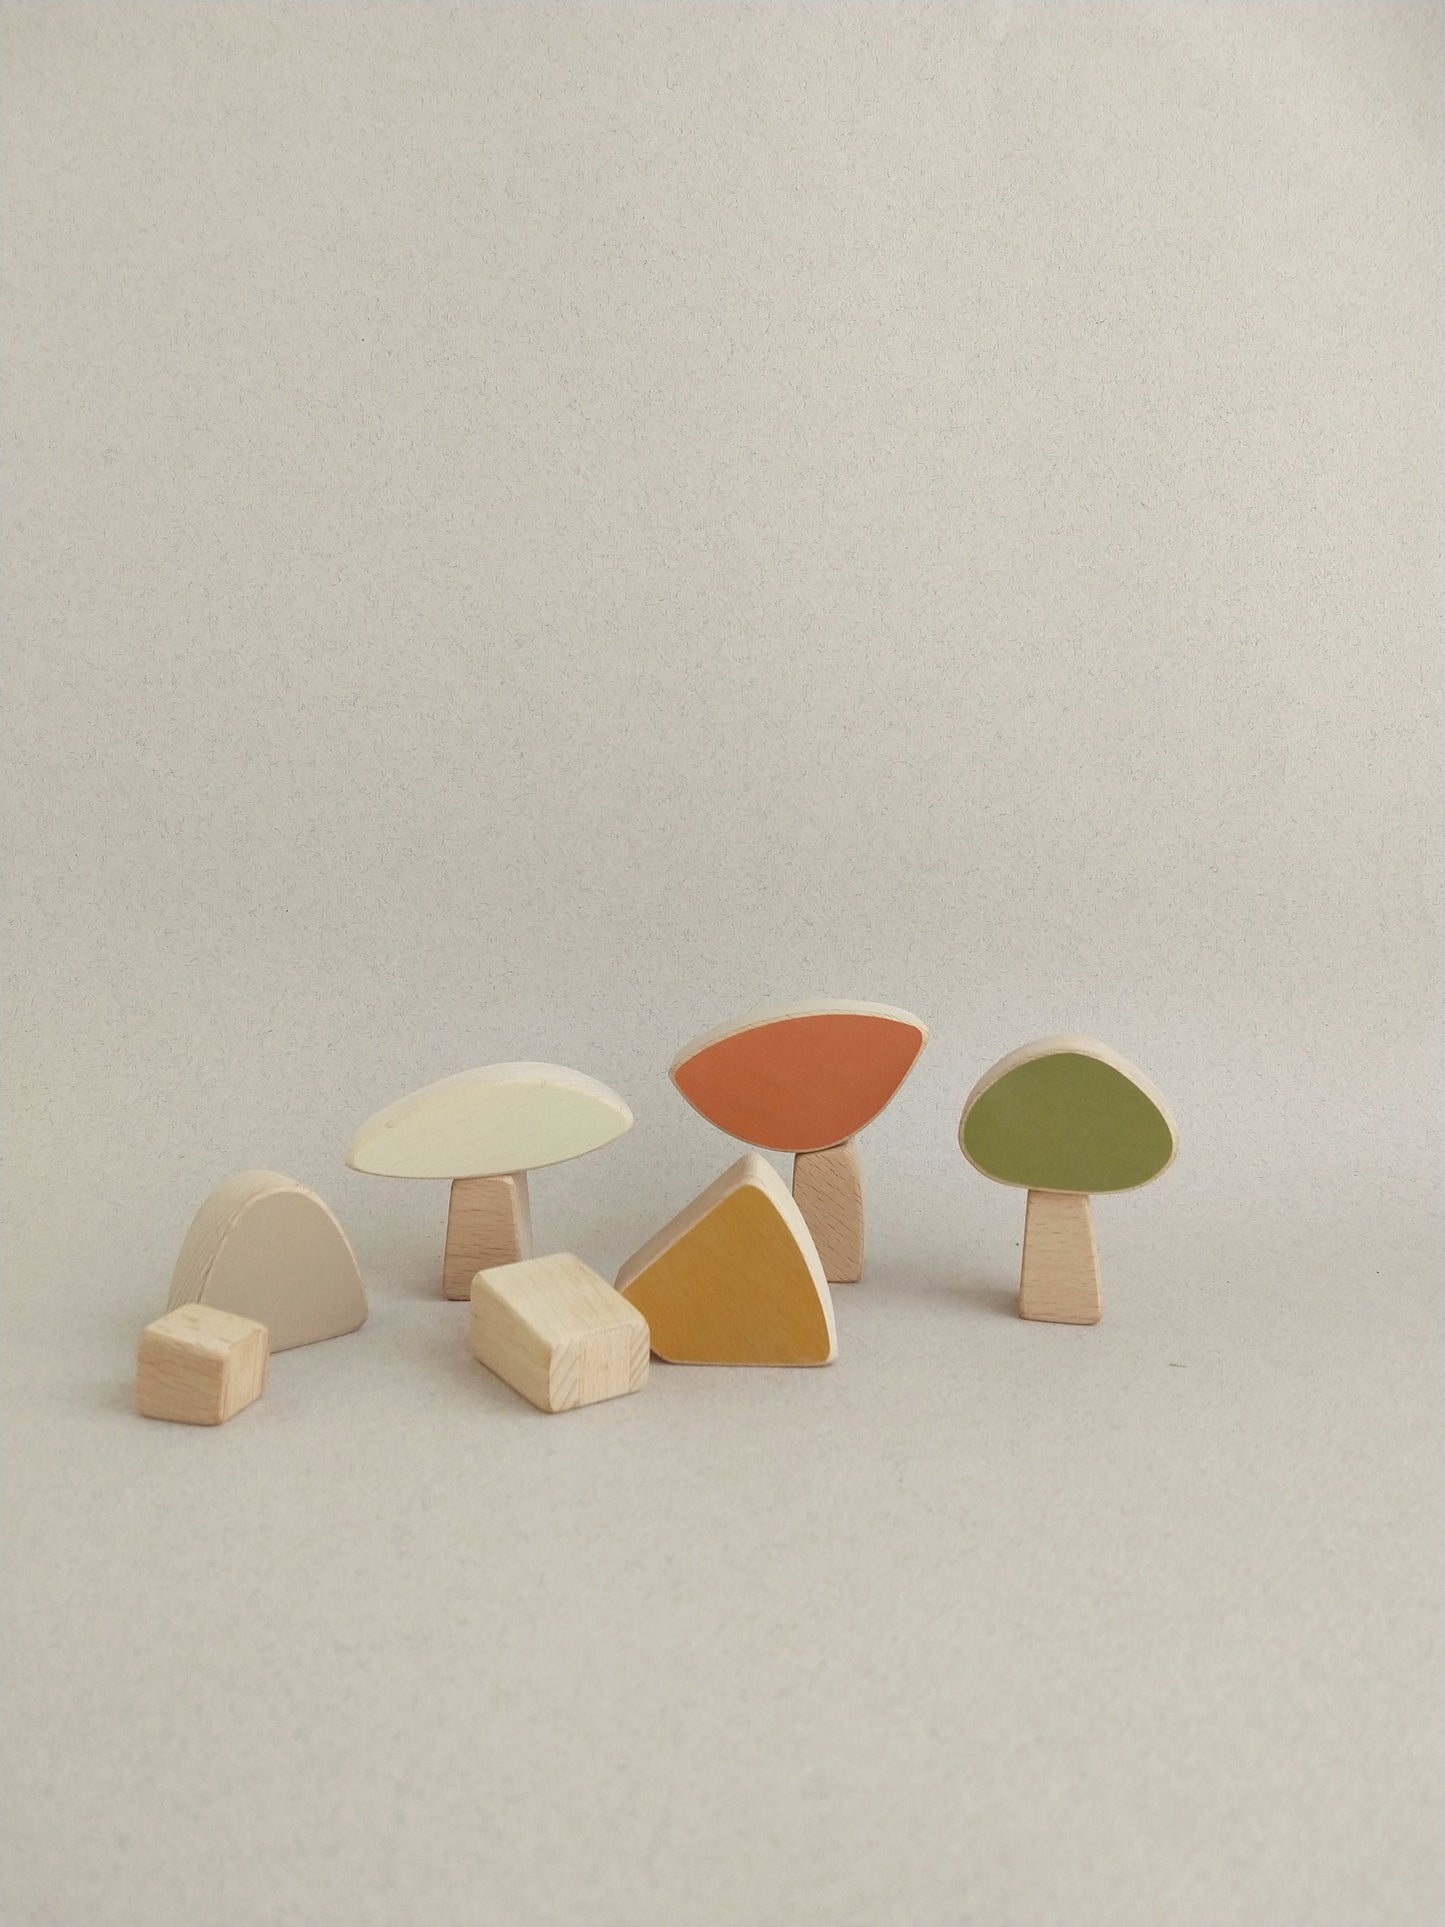 Mushrooms wooden toy set with magnets.